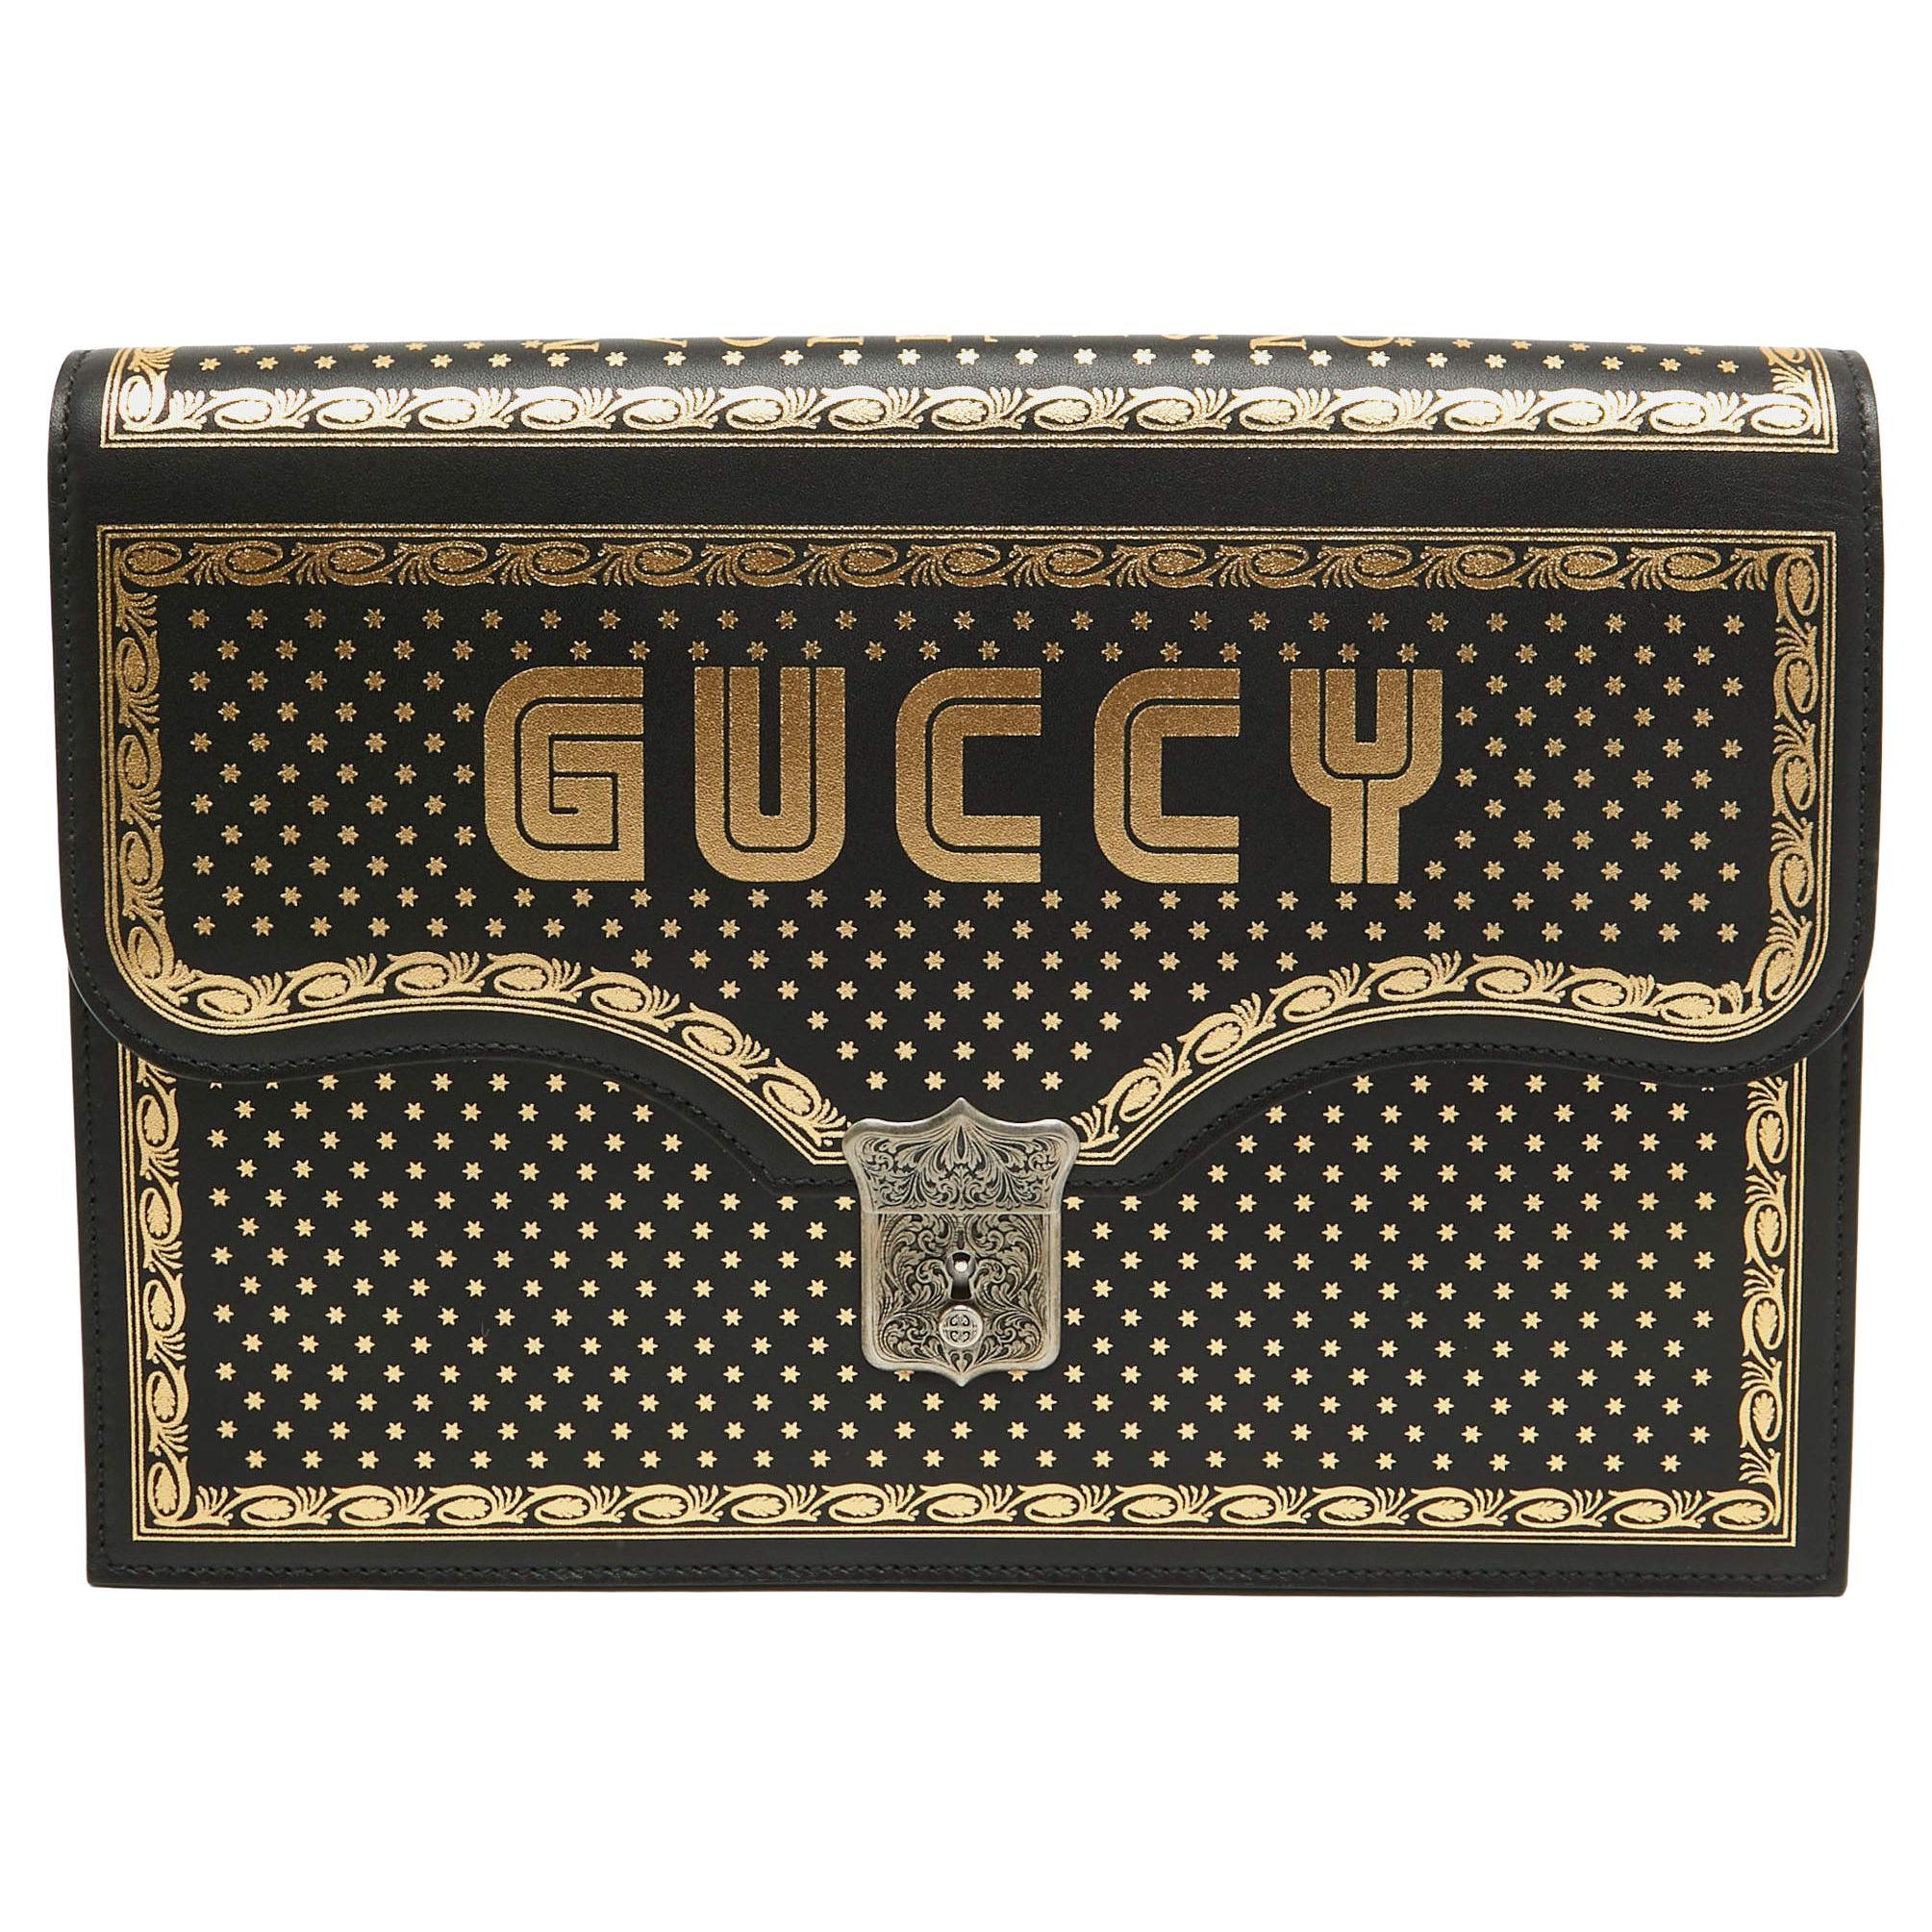 Gucci Black/Gold Leather Printed GUCCY Portfolio Clutch For Sale